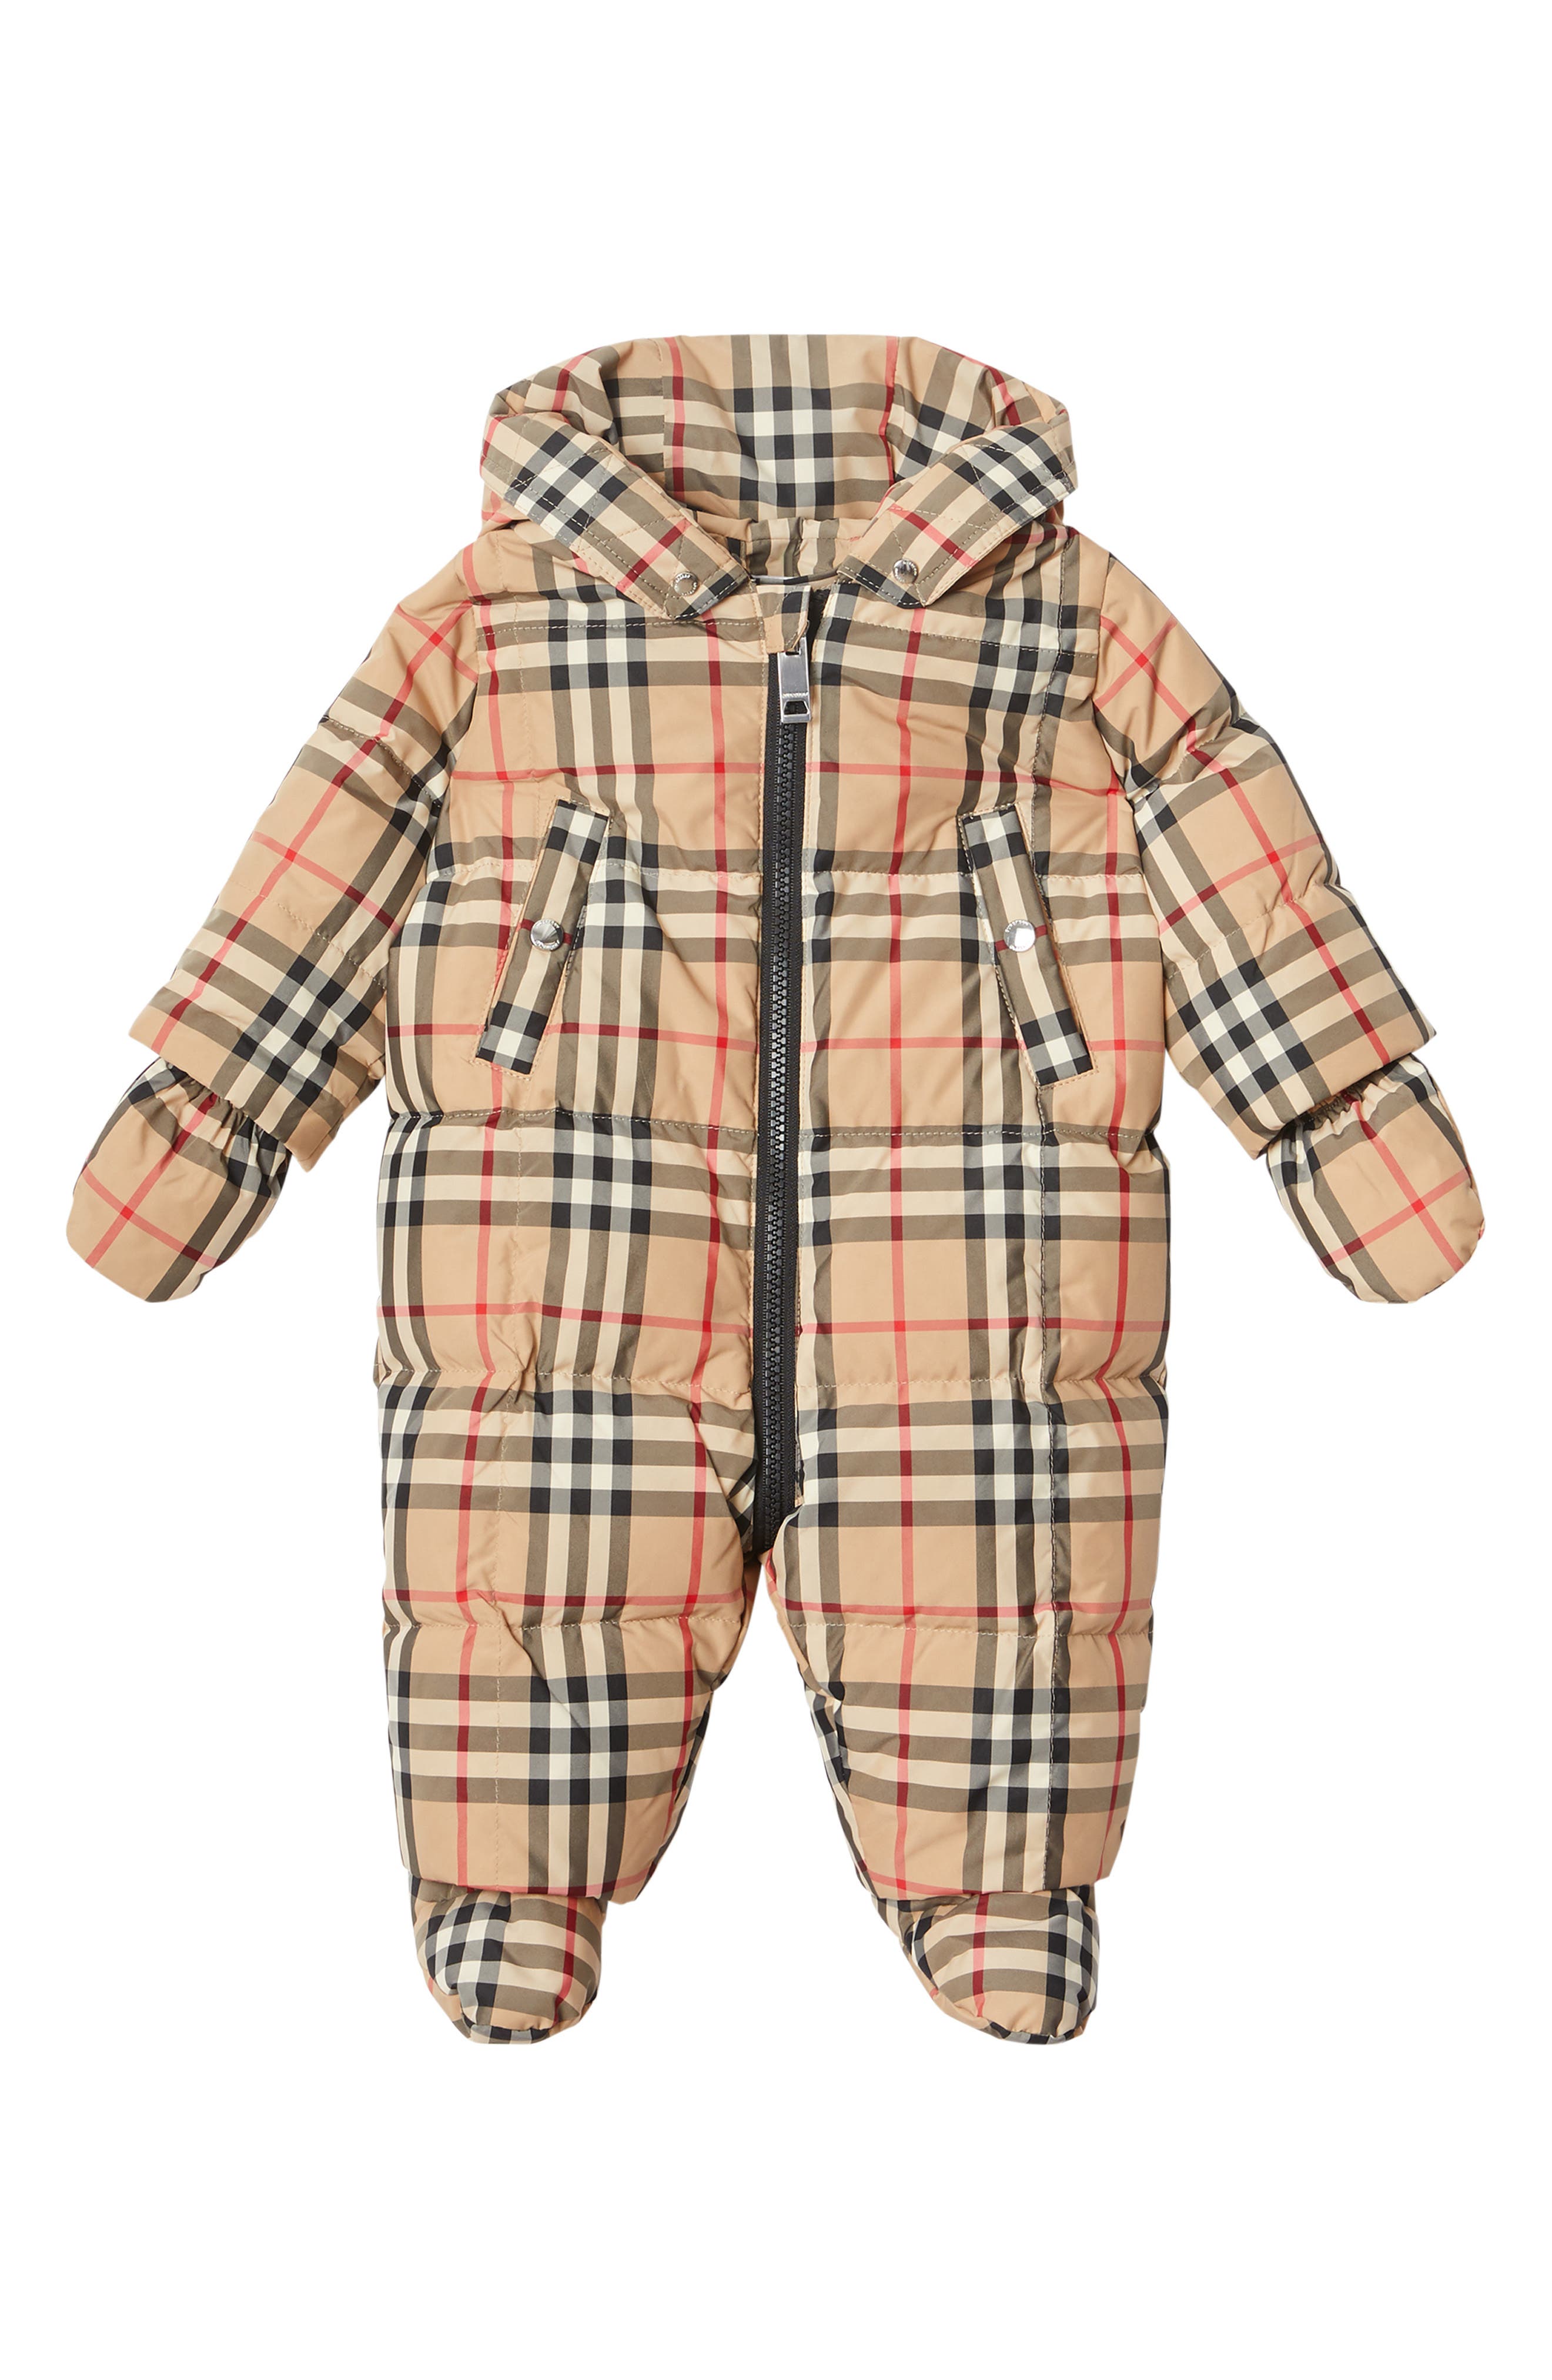 burberry baby clothes clearance